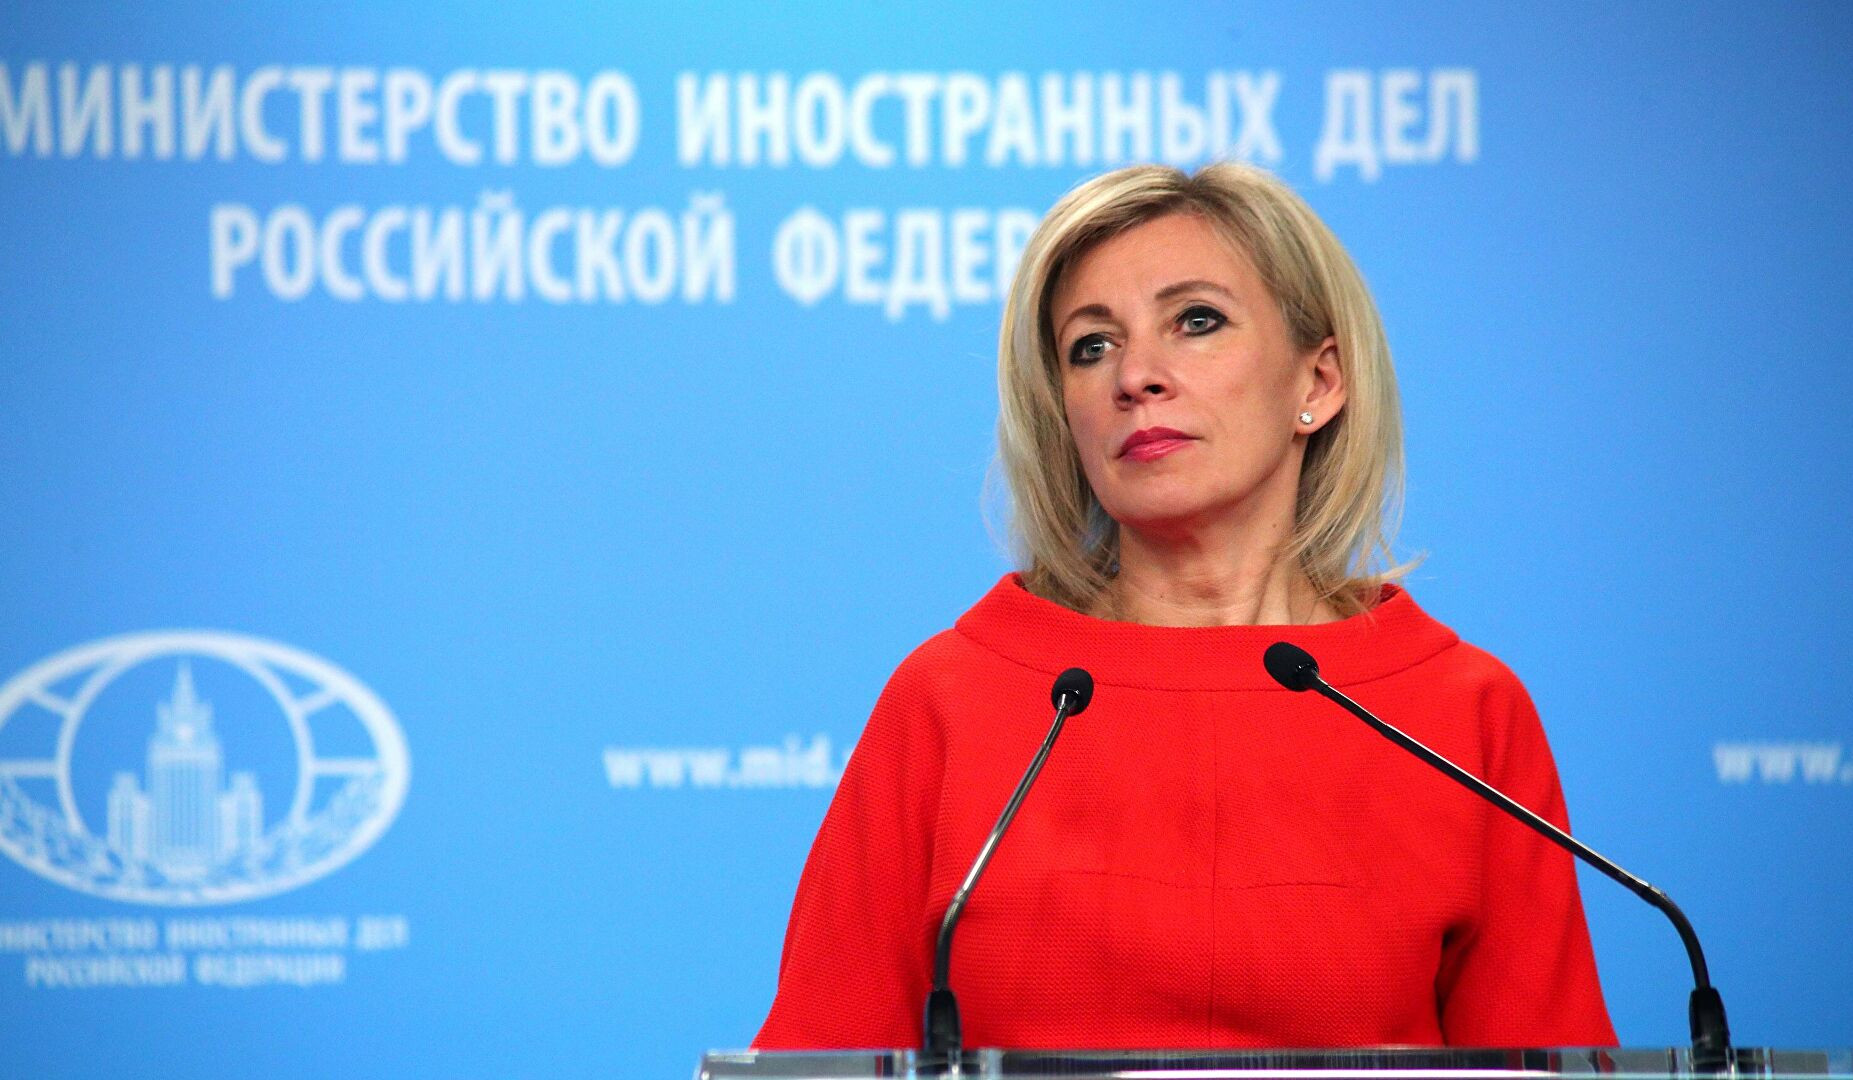 Russia’s Ministry of Defense is taking active actions to defuse situation in Nagorno-Karabakh: Zakharova